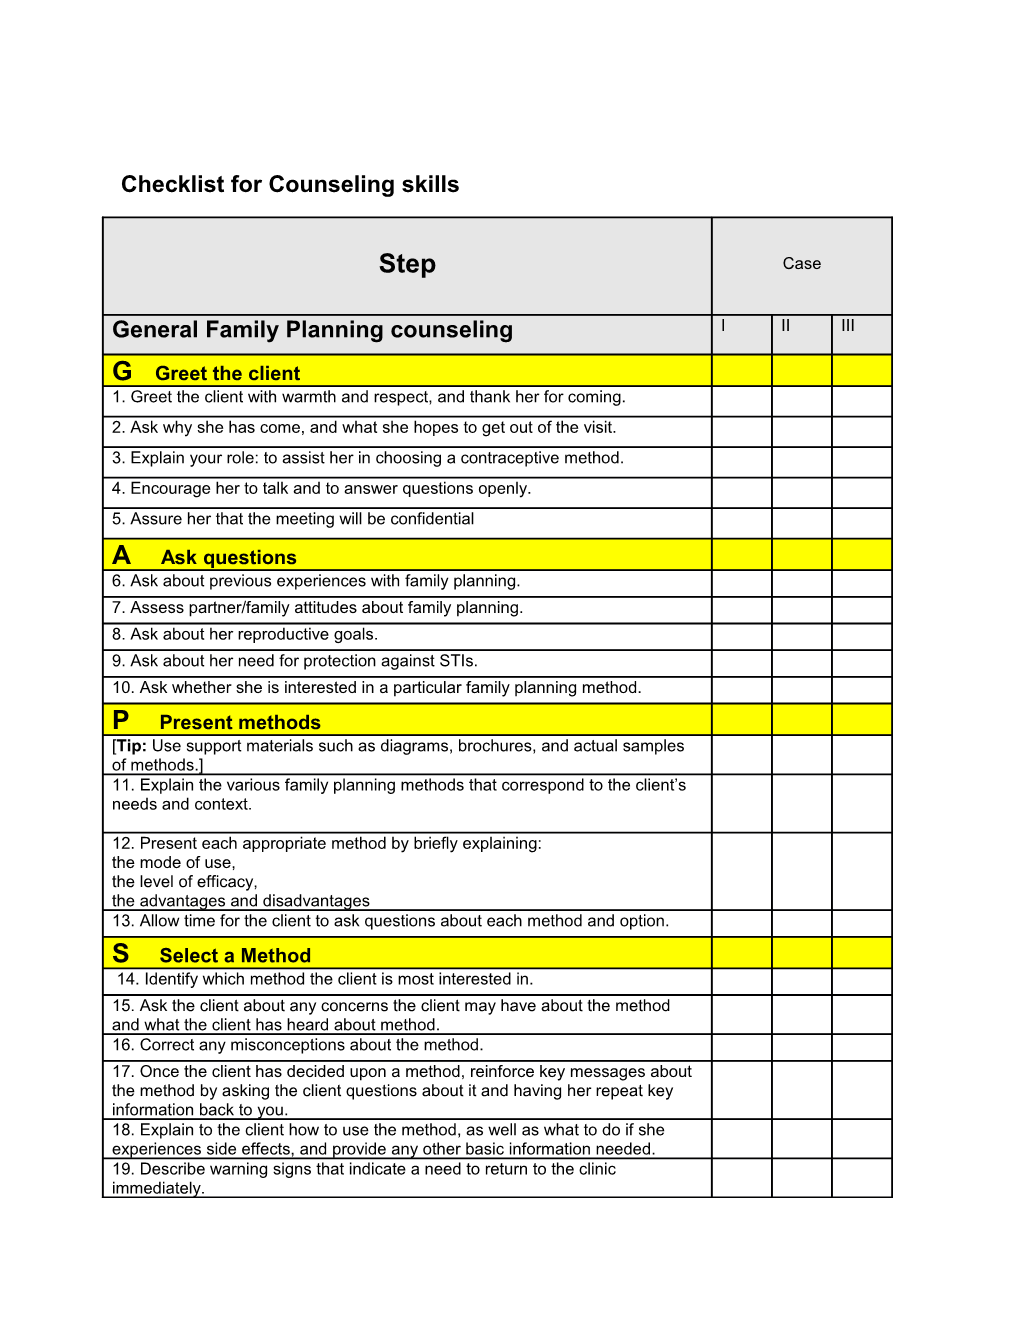 Checklist for Counseling Skills